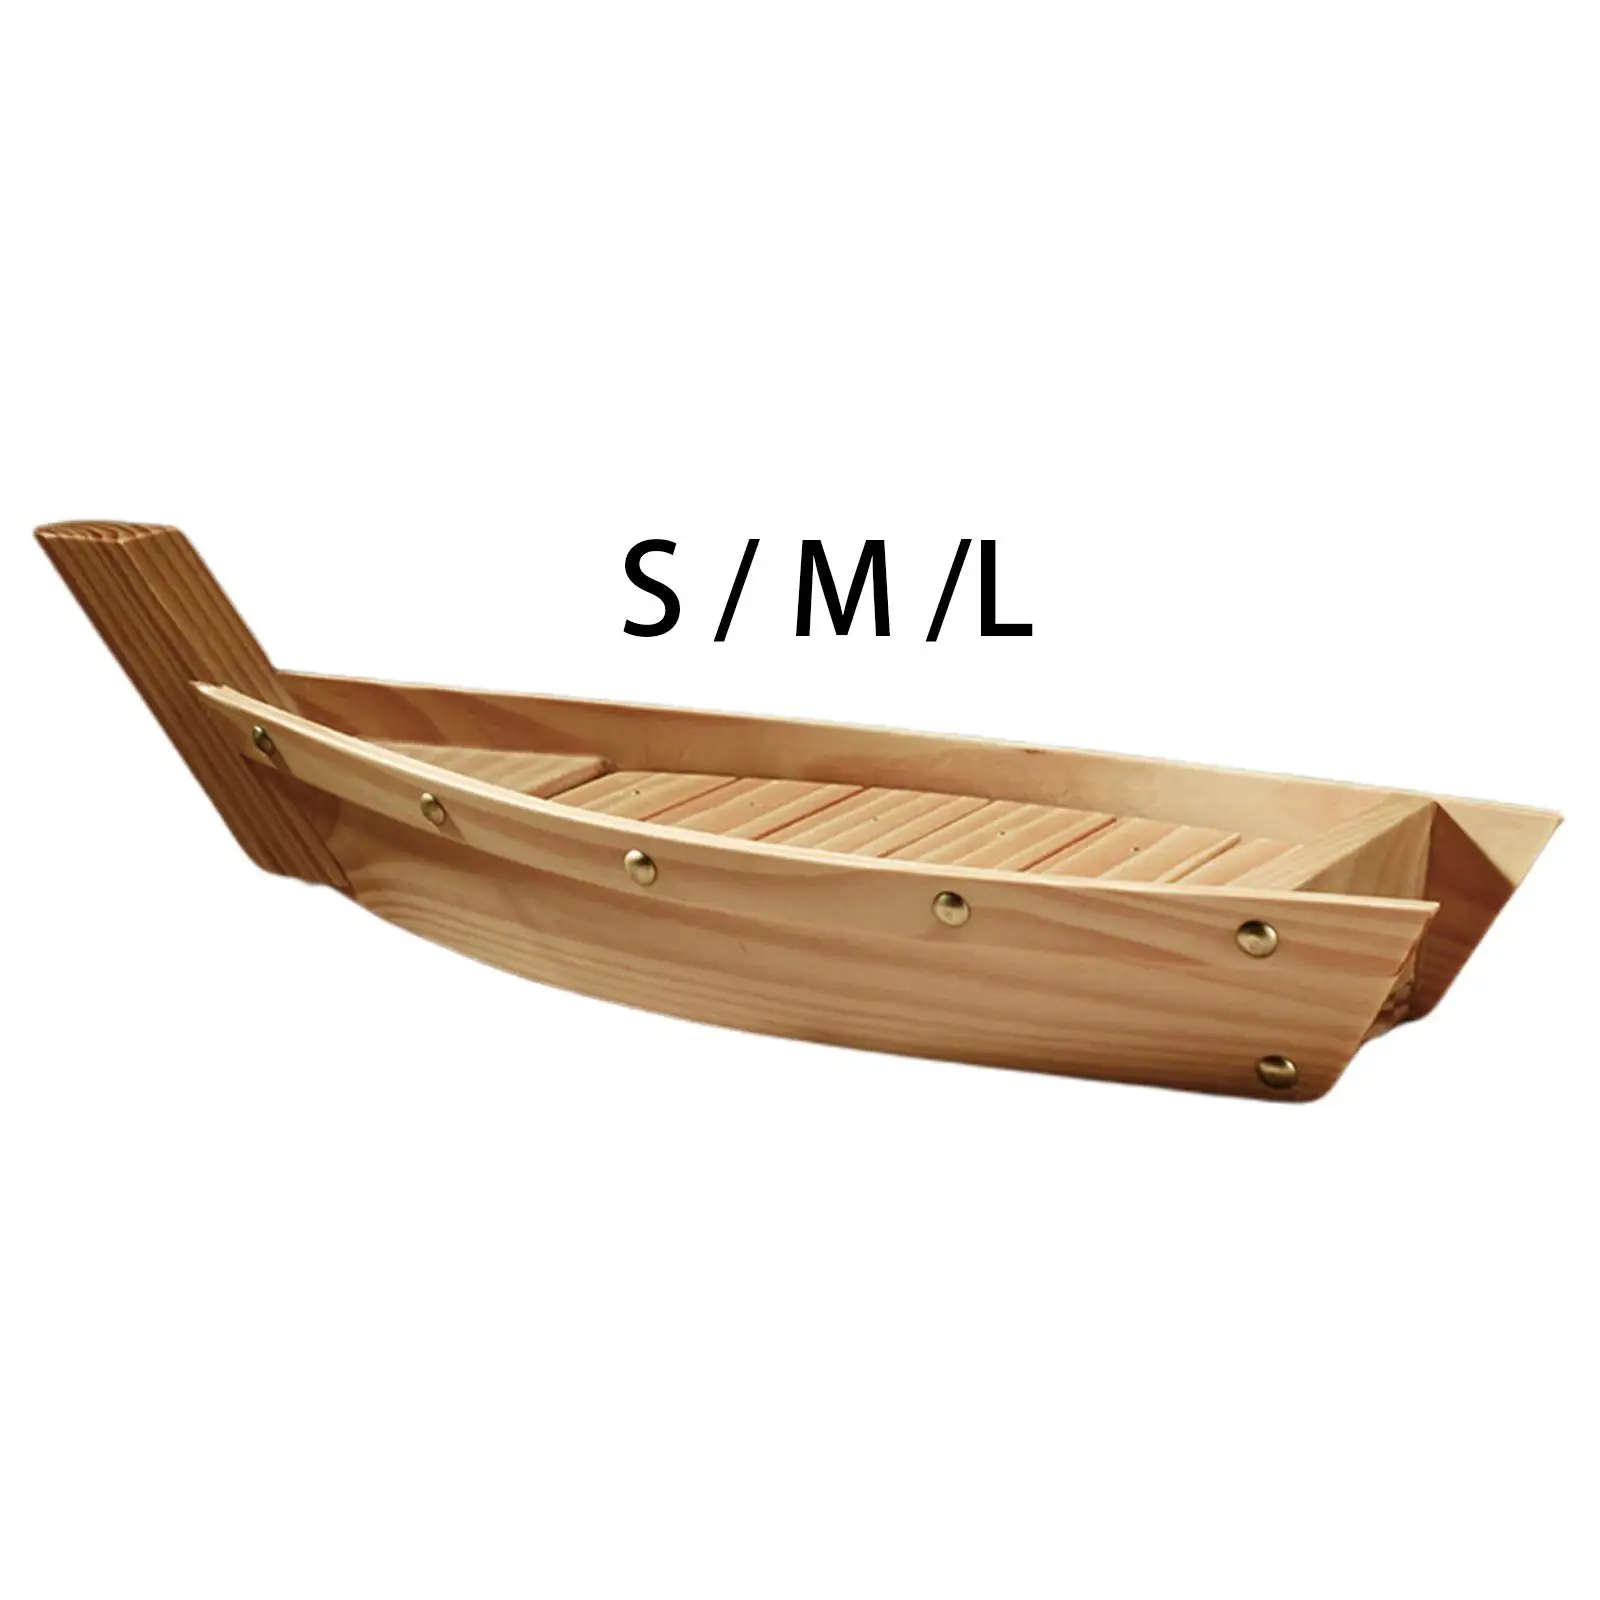 Wooden Sushi Boat Plate Fruit Snacks Tray, Tableware Decoration Kitchen Accessories Serving Boat Plate, for Bar, Home Appetizers